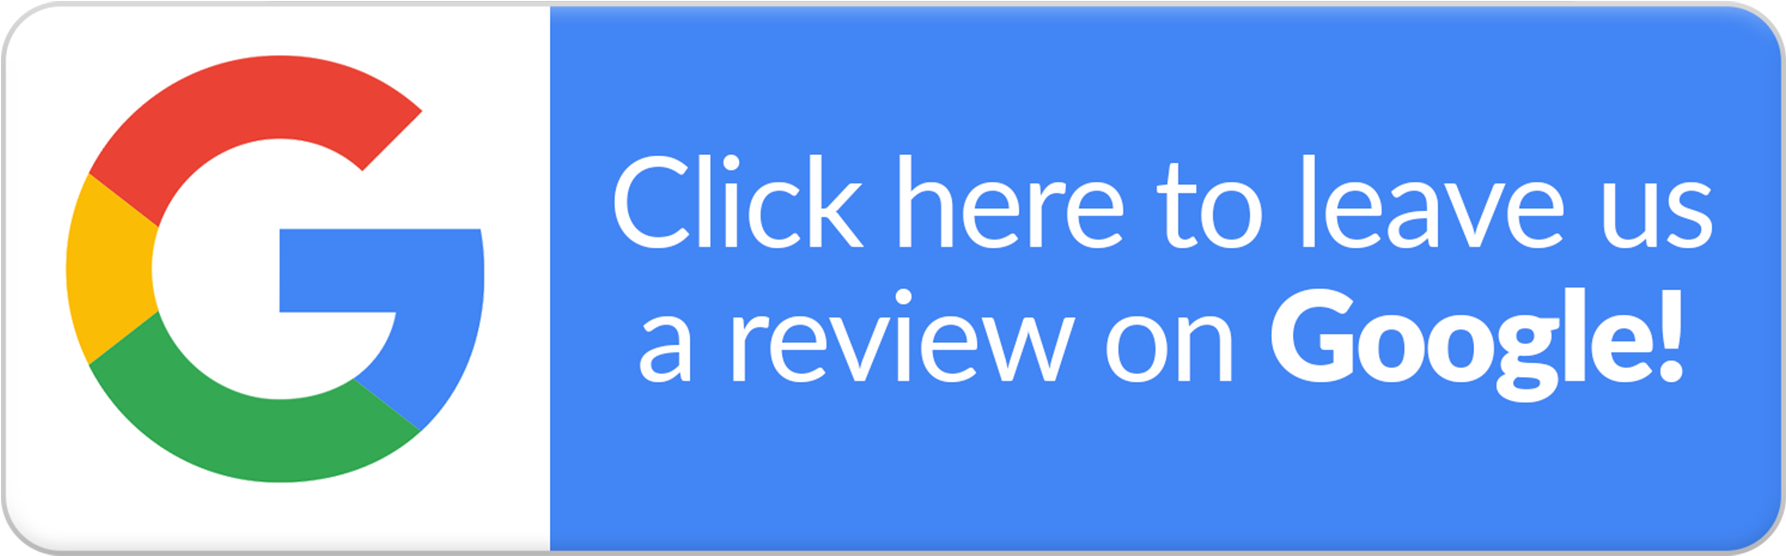 Click here to review us on Google!